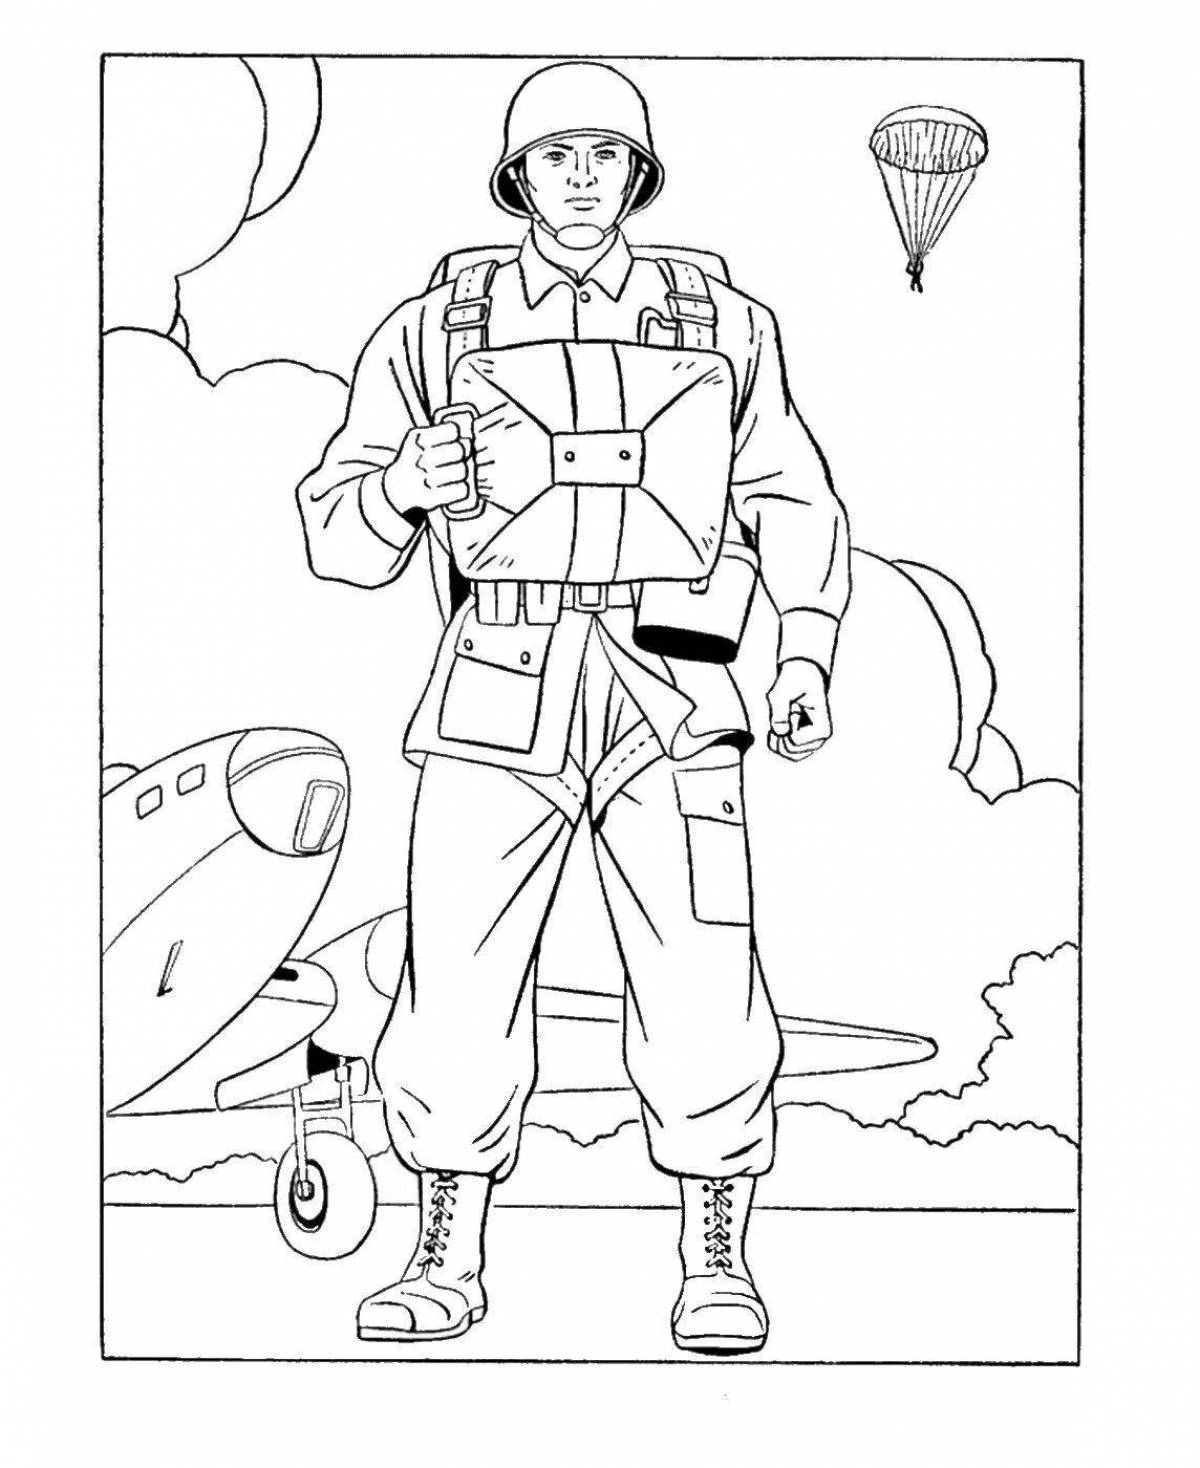 Creative war coloring book for kids